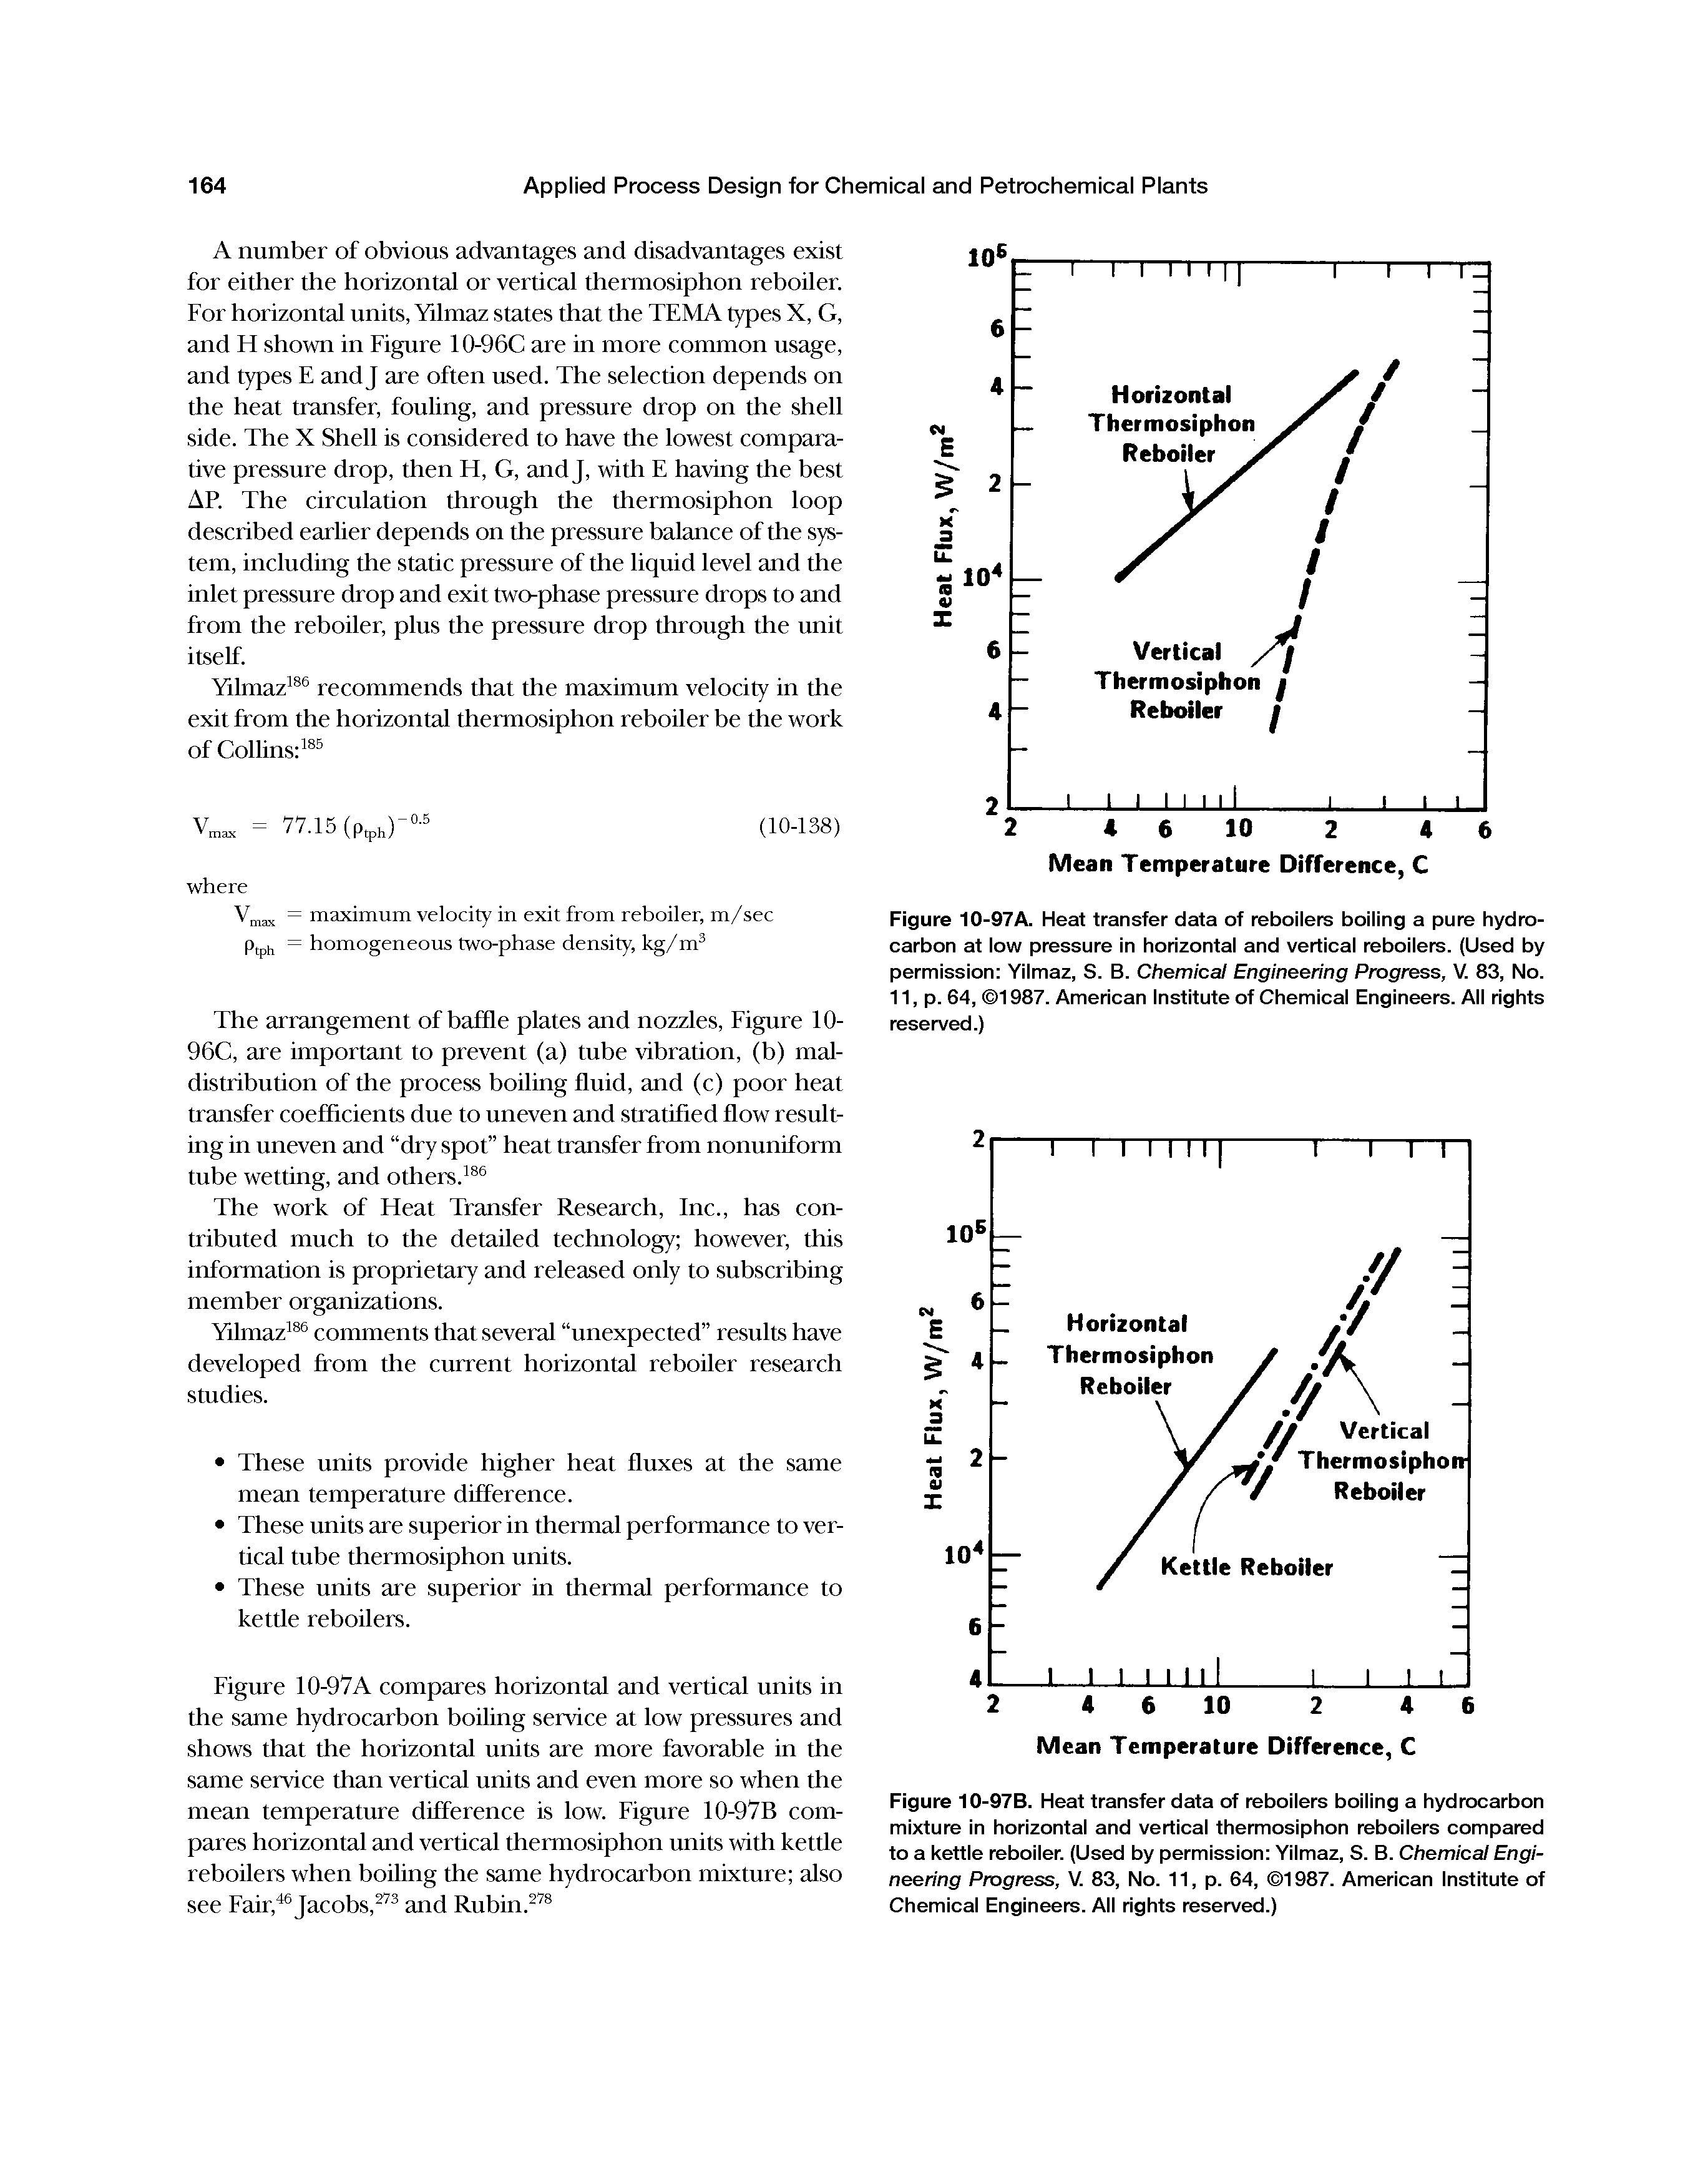 Figure 10-97B. Heat transfer data of reboilers boiling a hydrocarbon mixture in horizontal and vertical thermosiphon reboilers compared to a kettle reboiler. (Used by permission Yilmaz, S. B. Chemical Engineering Progress, V. 83, No. 11, p. 64, 1987. American Institute of Chemical Engineers. All rights reserved.)...